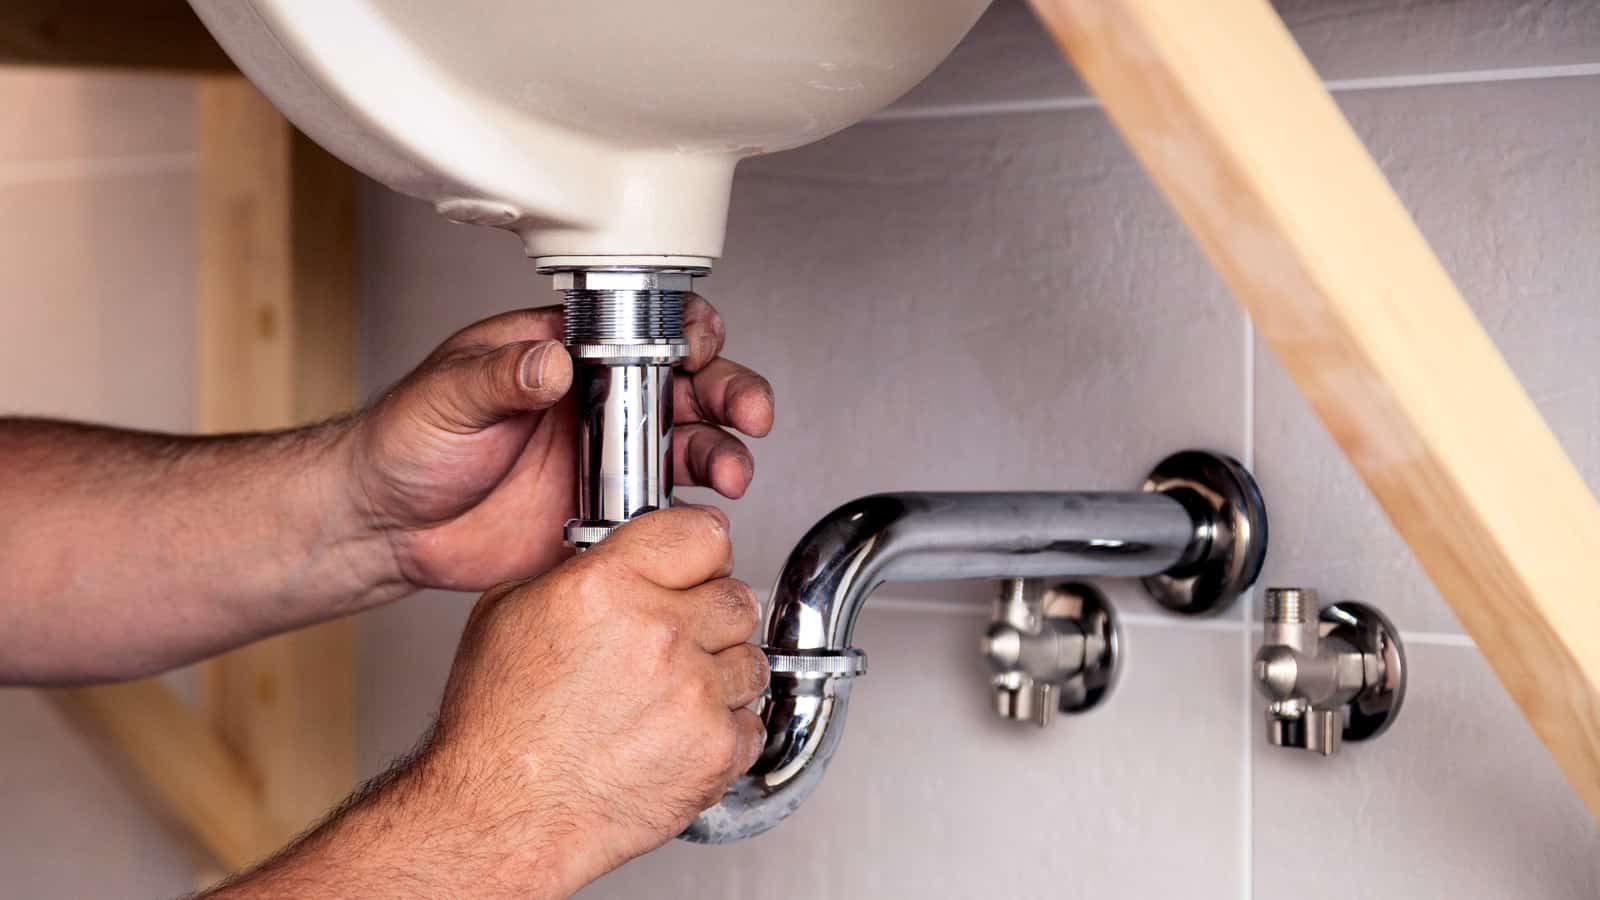 All Star Plumbing Heating And Air Inc of Los Angeles